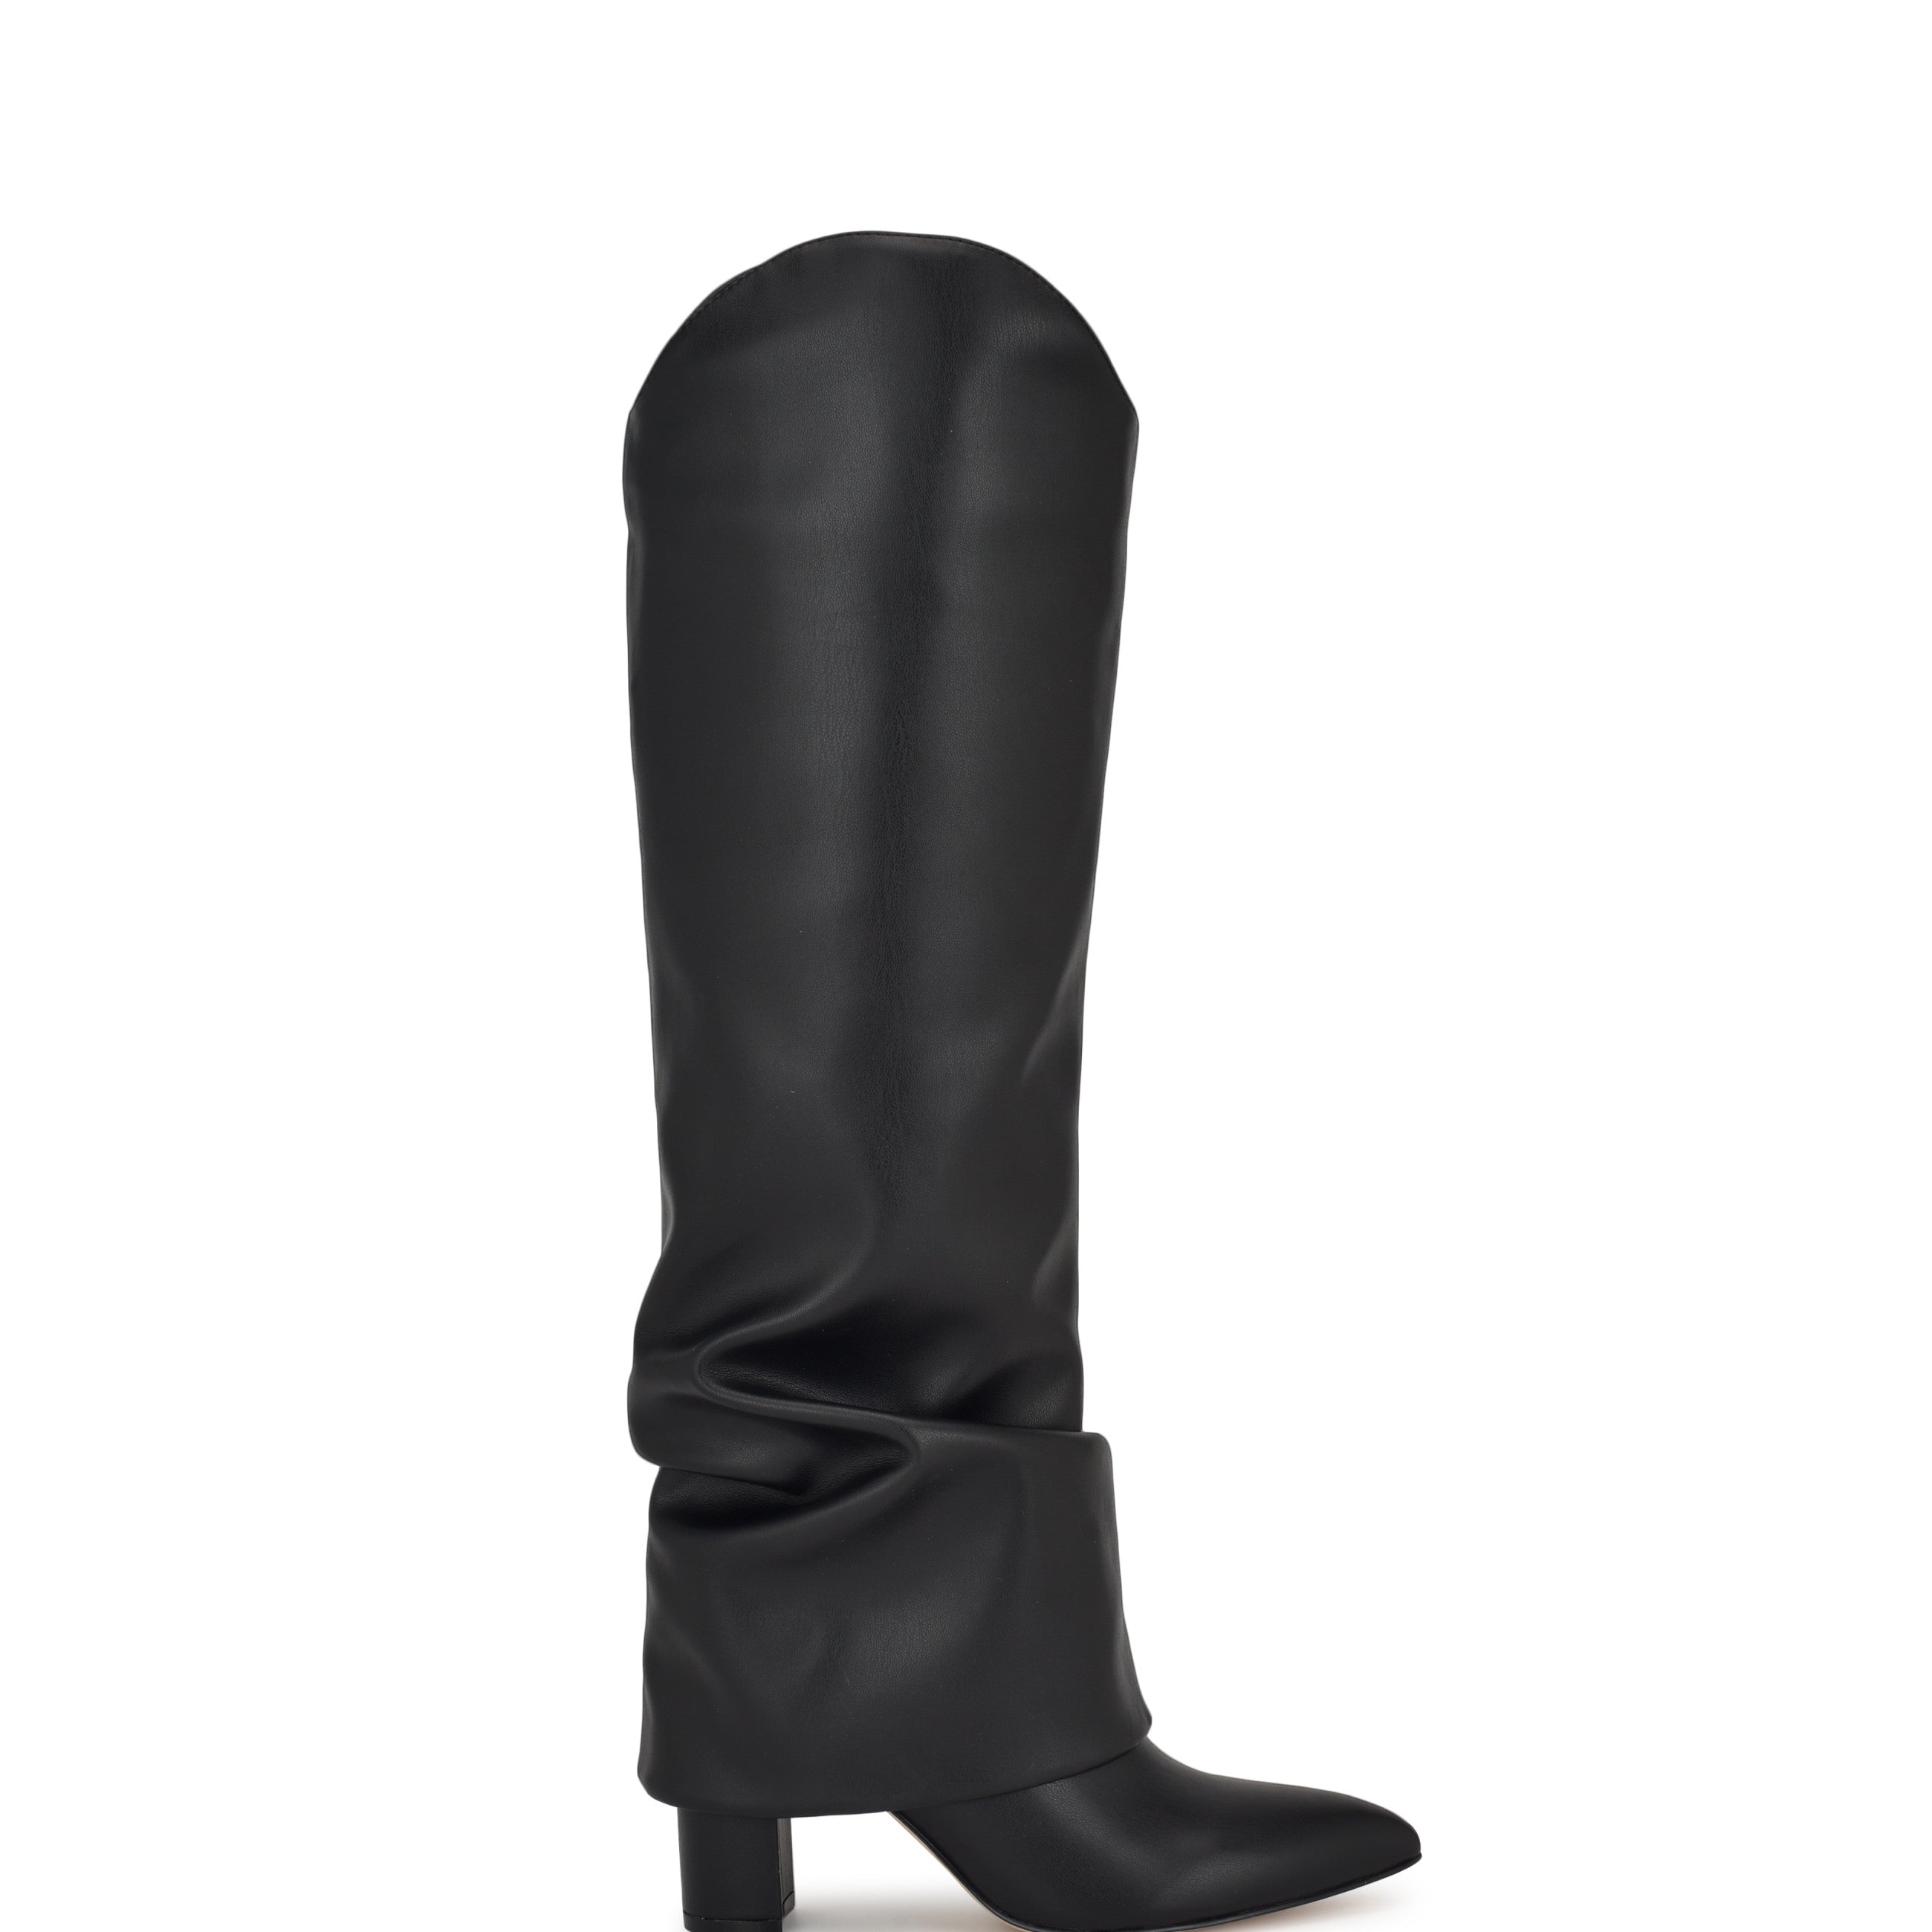 Lindey Foldover Dress Boots